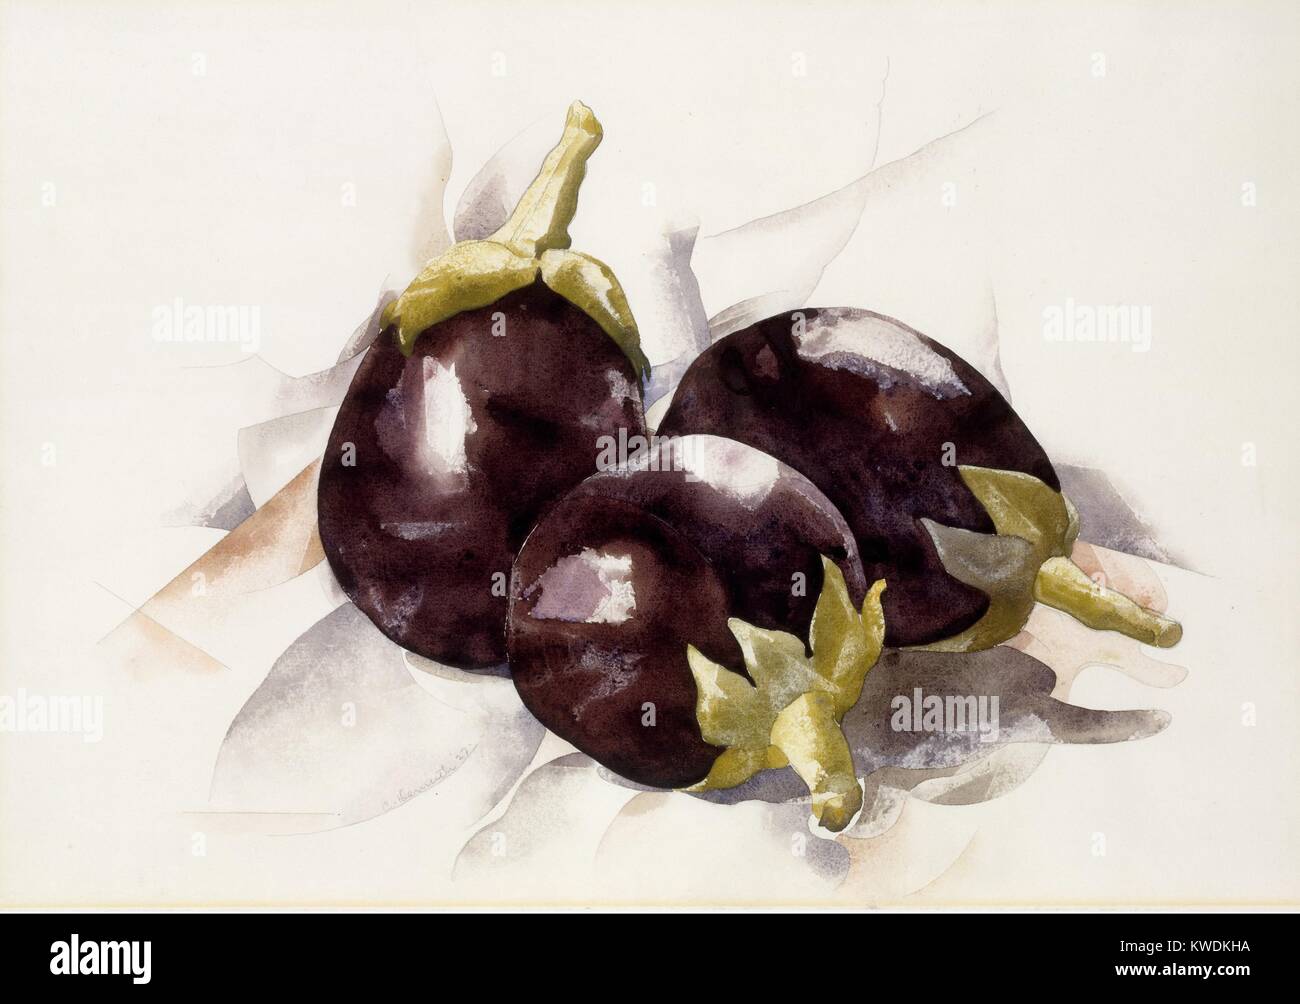 EGGPLANTS, by Charles Demuth, 1927, American painting, watercolor, and graphite on cardboard. Study of three deep purple eggplants, with white patches depicting light reflecting from their shiny surface. The artist painted with translucent watercolors, emphasizing the color, and the effect of light (BSLOC 2017 7 96) Stock Photo